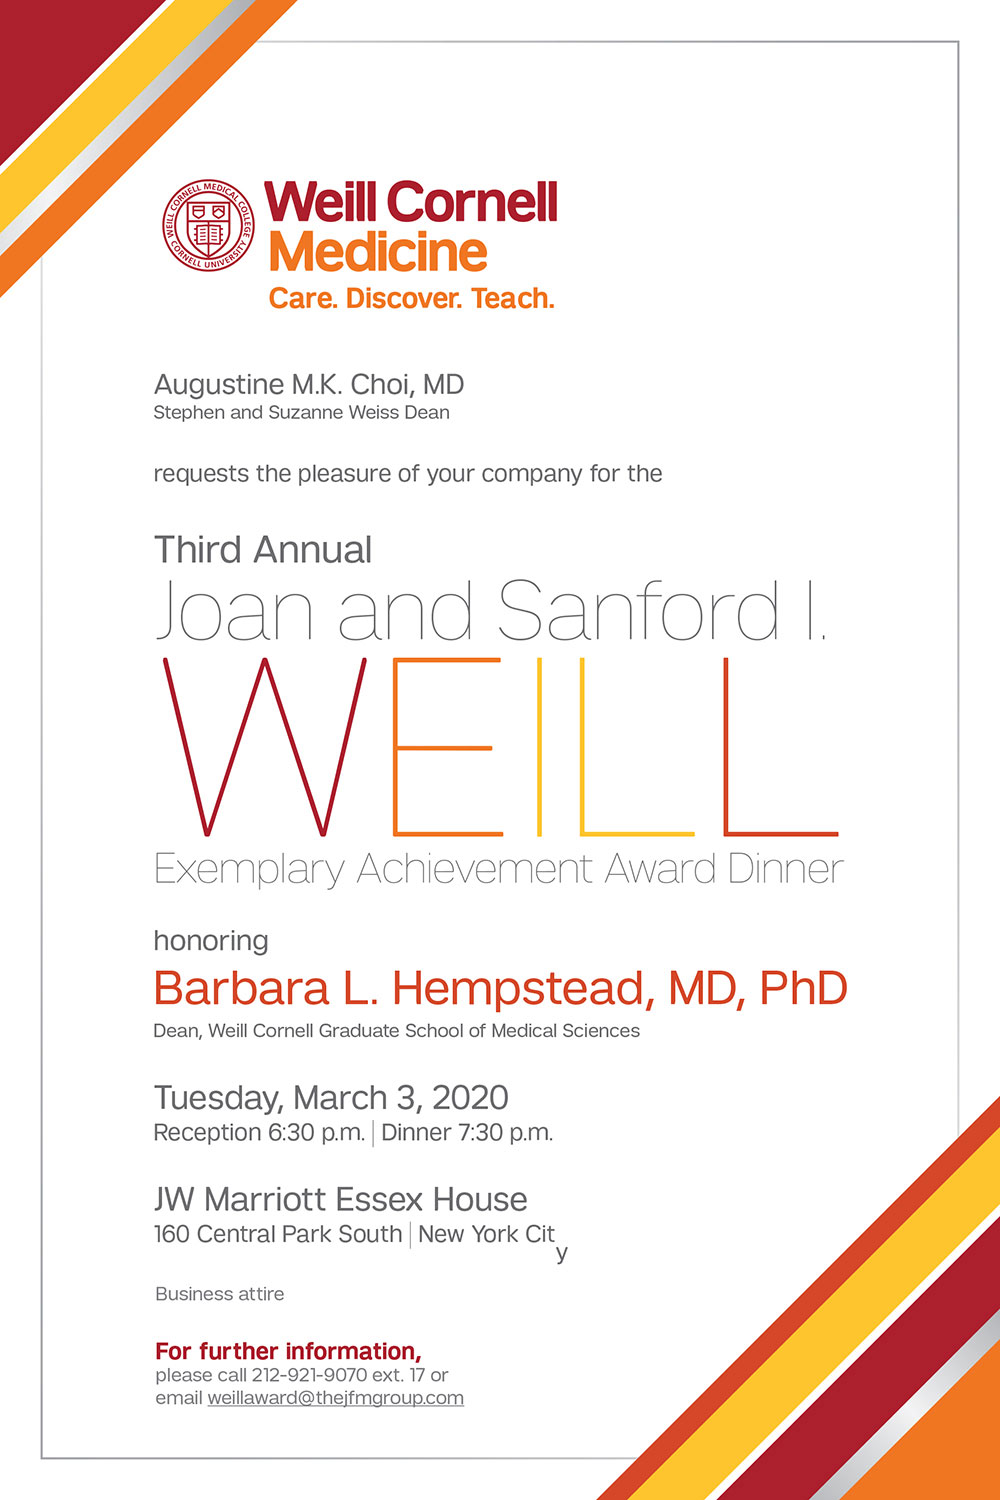 CLIENT:Weill Cornell Medicine

DATE:March 2020

PROJECT:Invitation for annual award dinner